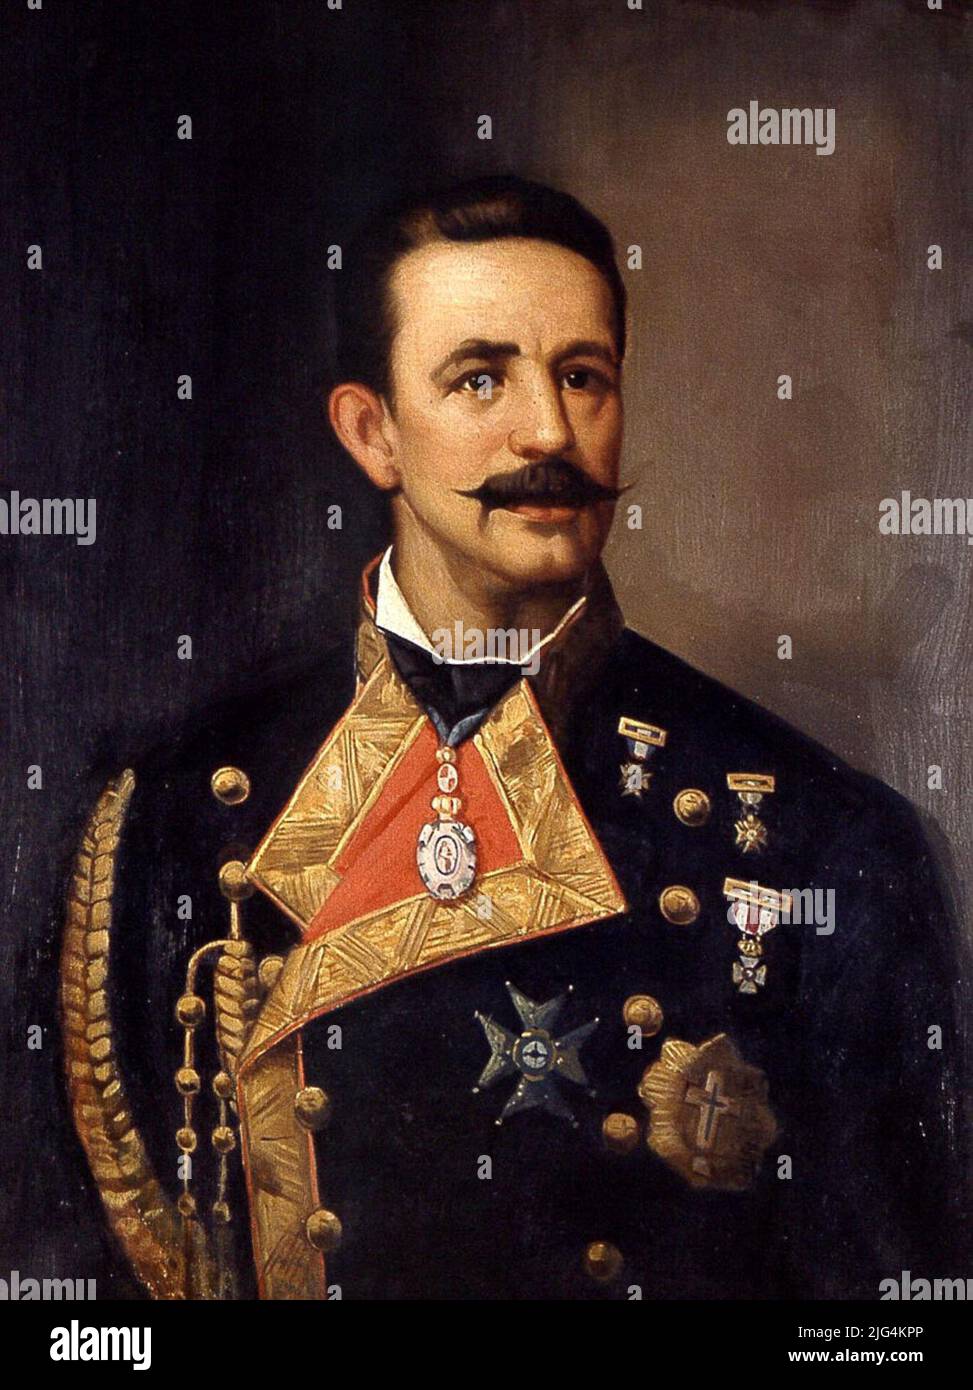 Portrait of Captain Cesáreo Fernández Duro (1830-1908). Portrait. Contemporary age. Gold and black frame with moldings. Cesáreo Fernández Duro. Gala uniform with three crosses, two large crosses, sneak medal of the Academy of History and Neutral Fund. Stock Photo